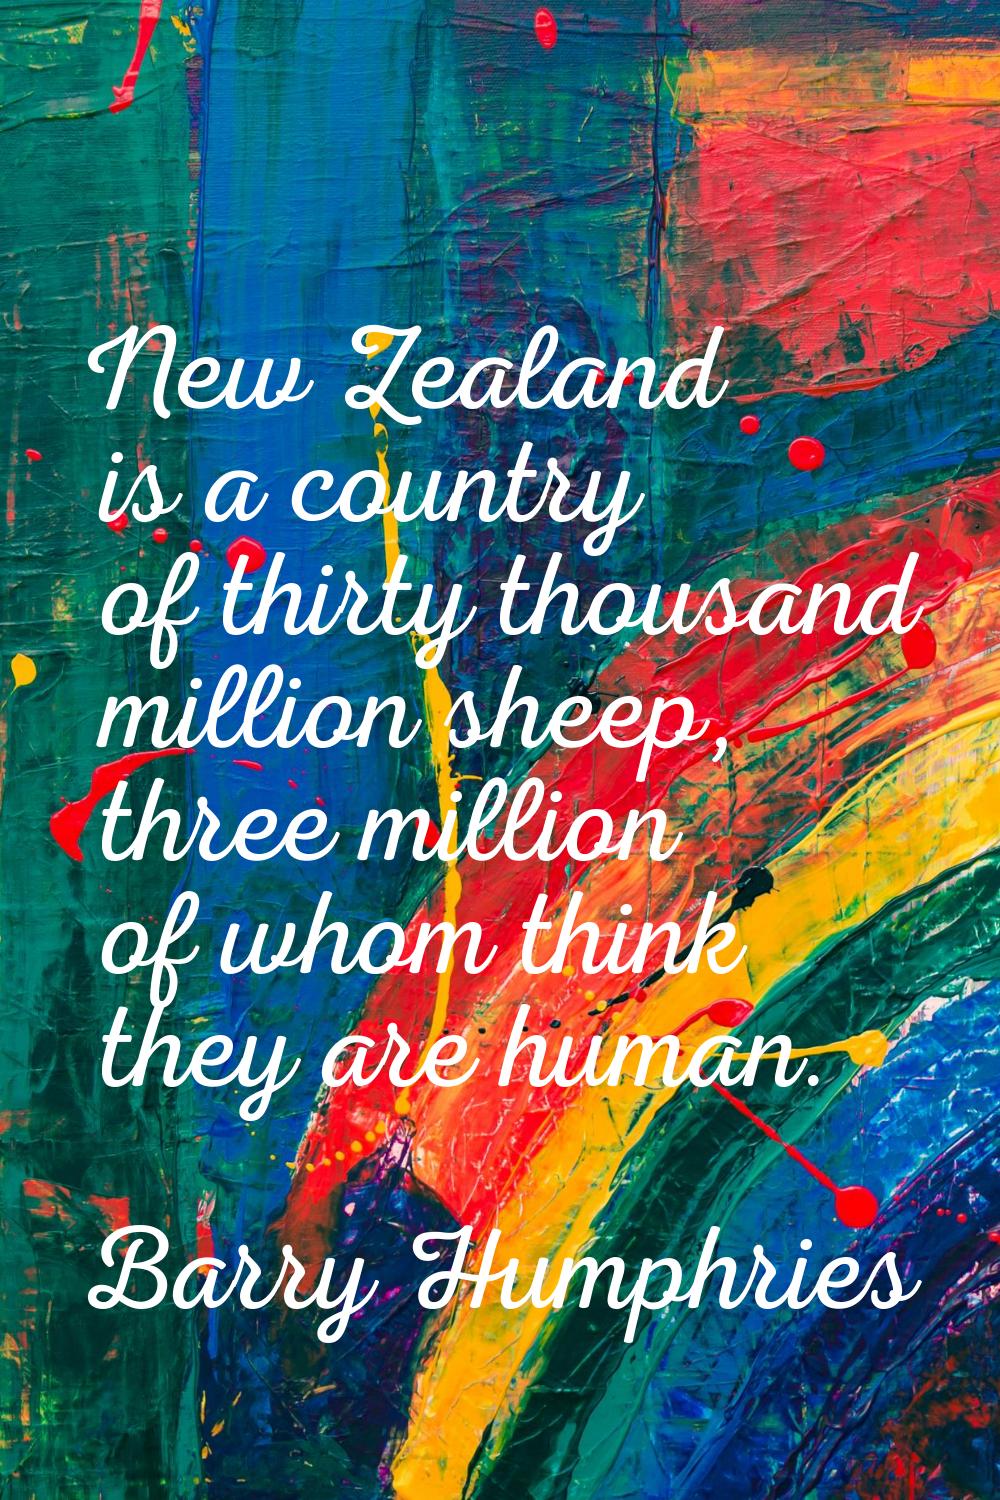 New Zealand is a country of thirty thousand million sheep, three million of whom think they are hum